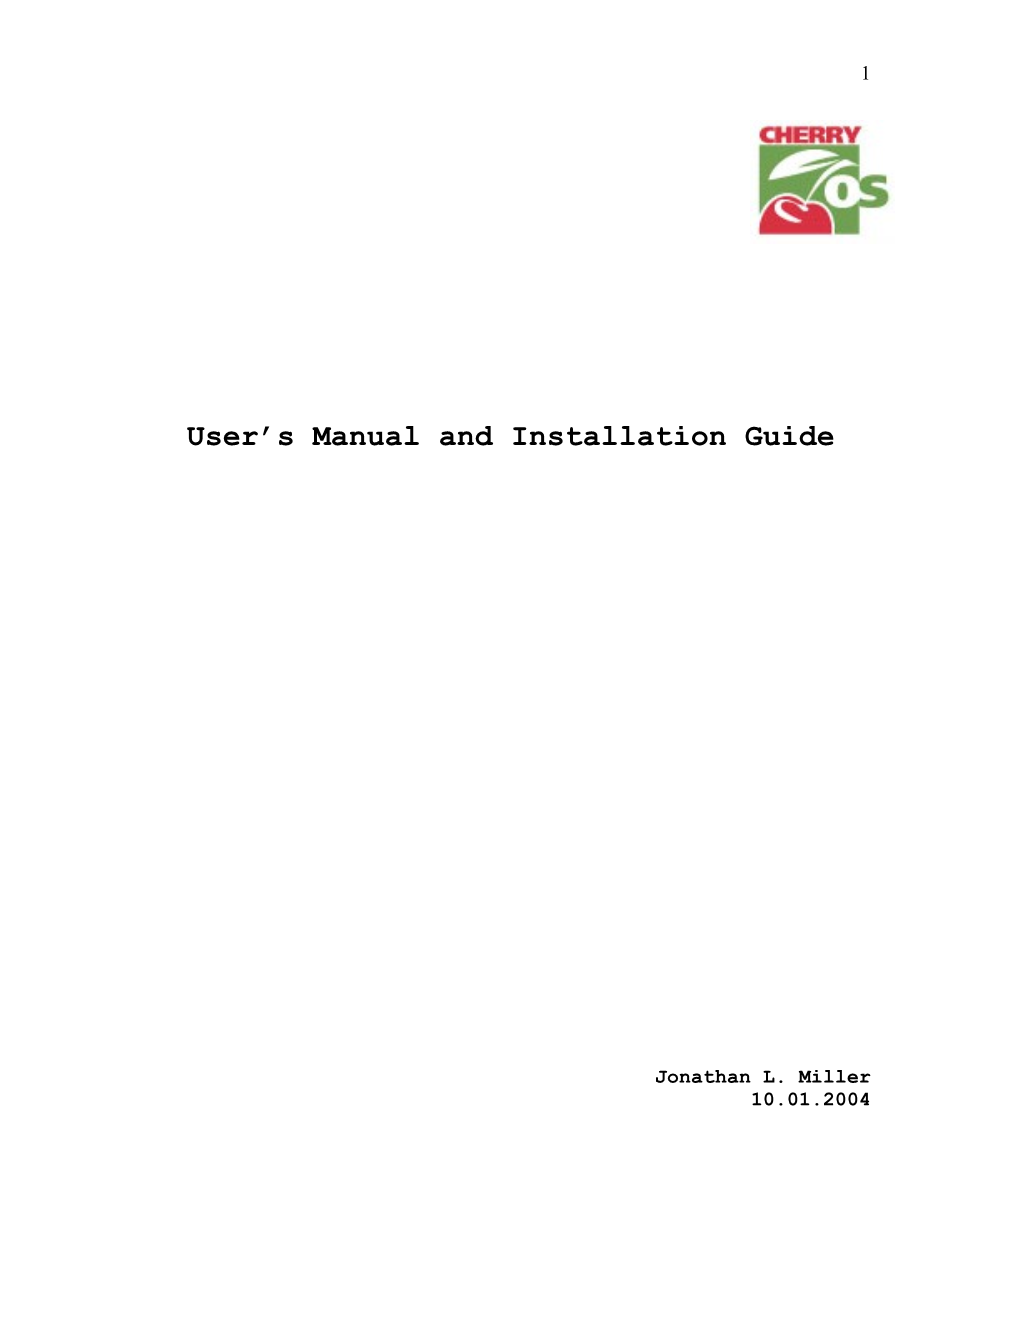 User S Manual and Installation Guide